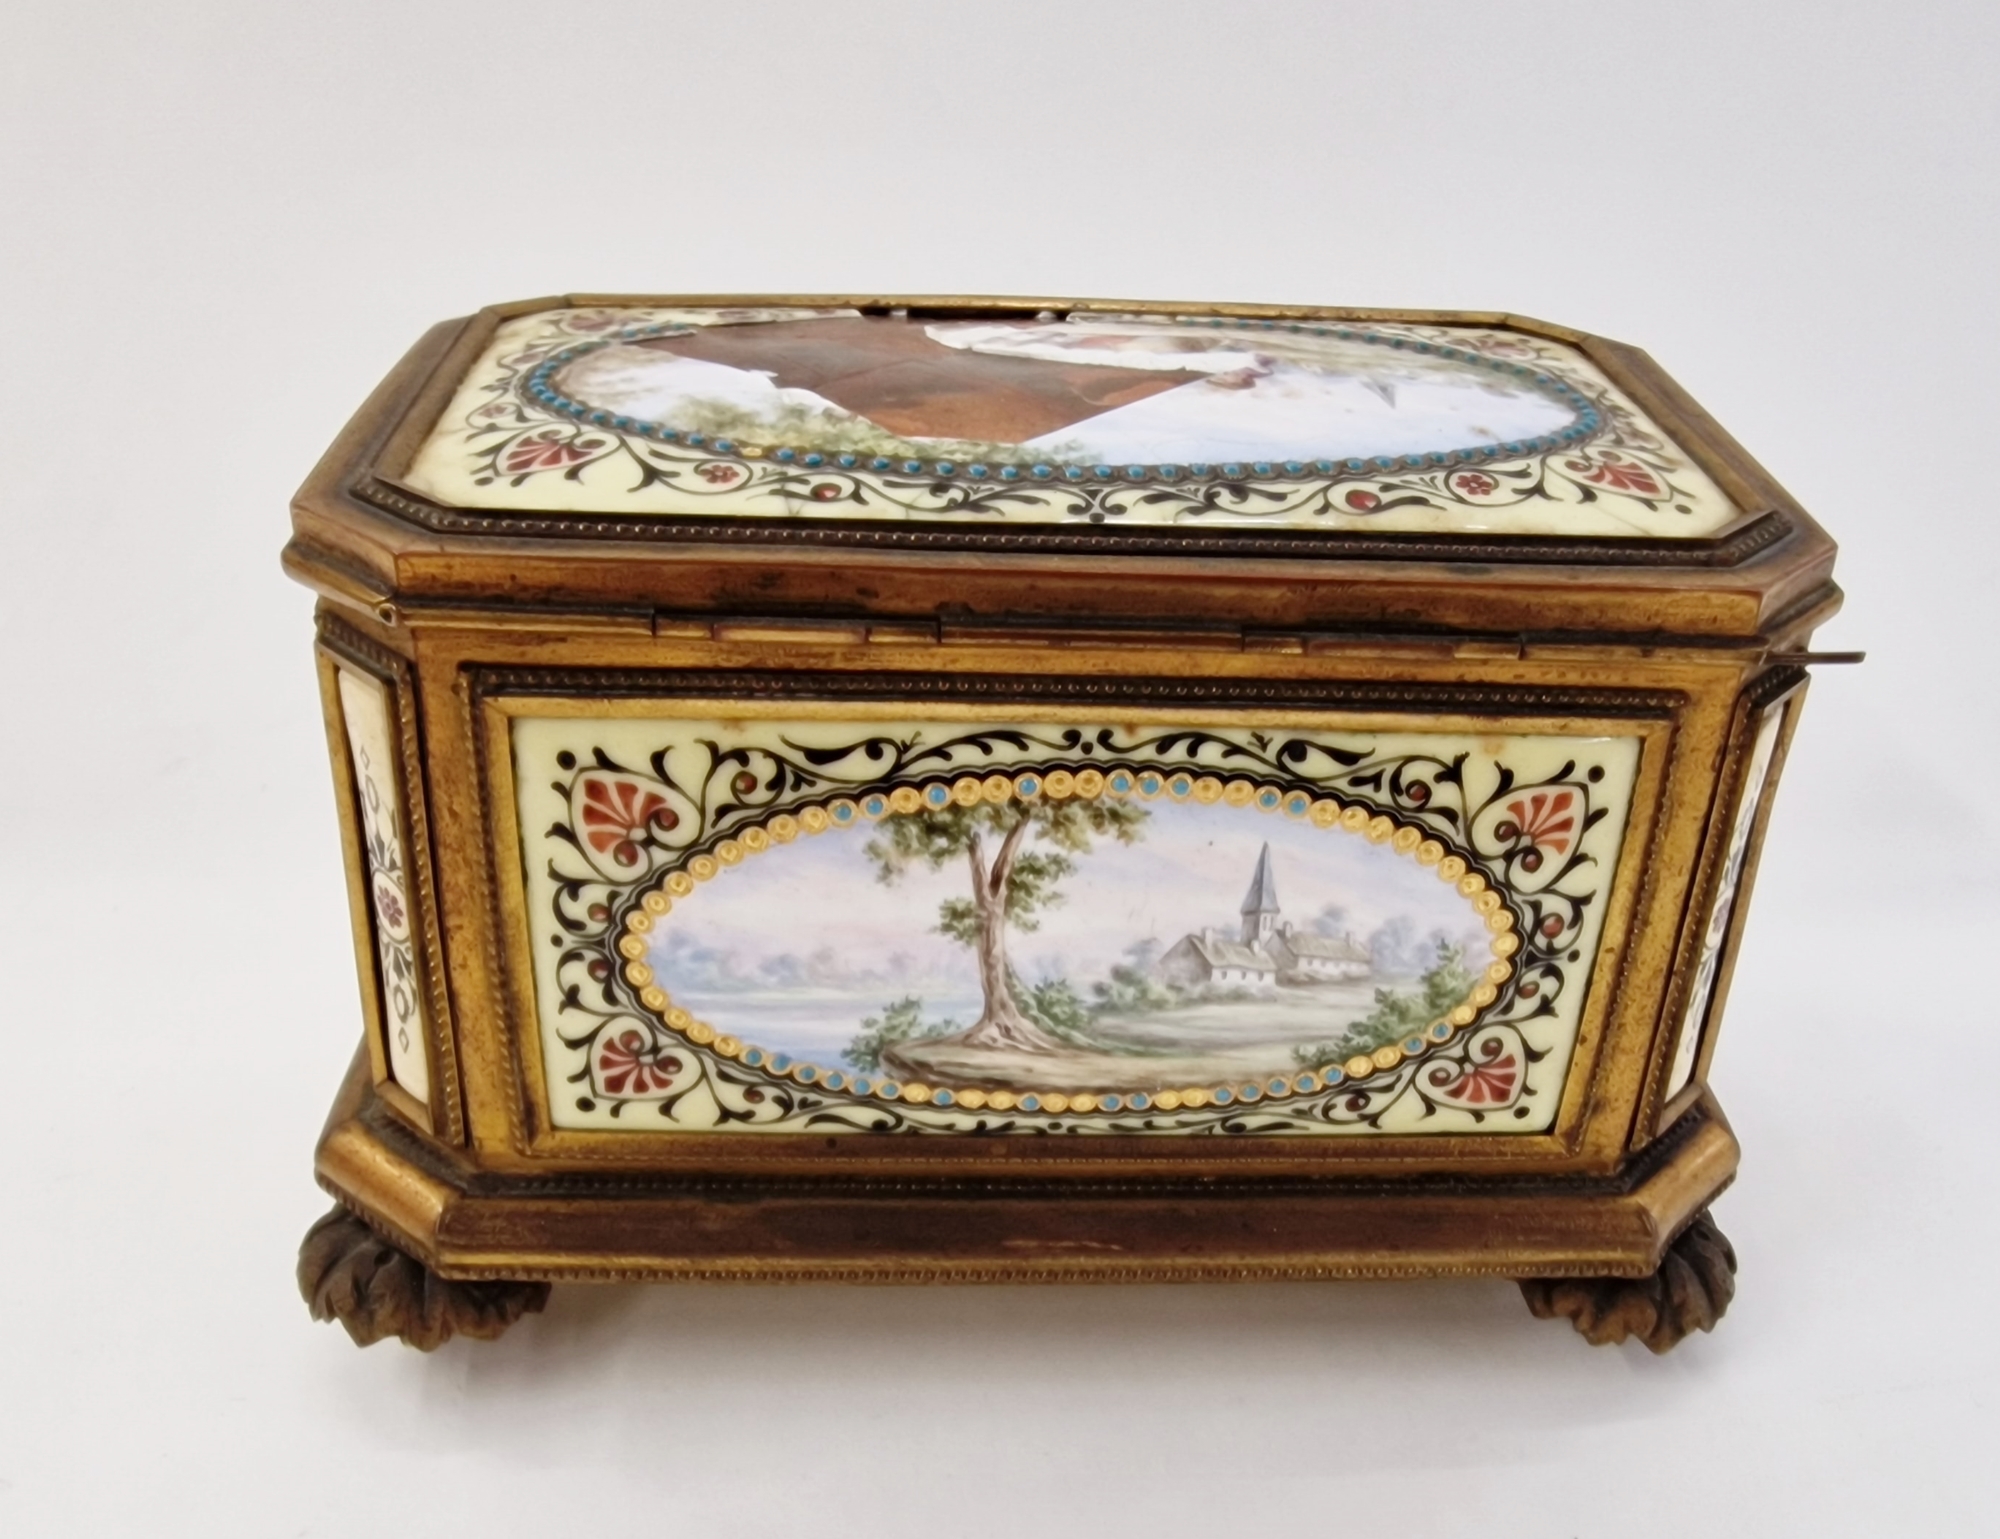 Late 19th century French enamel and gilt metal-mounted jewellery casket, of canted rectangular - Image 5 of 8